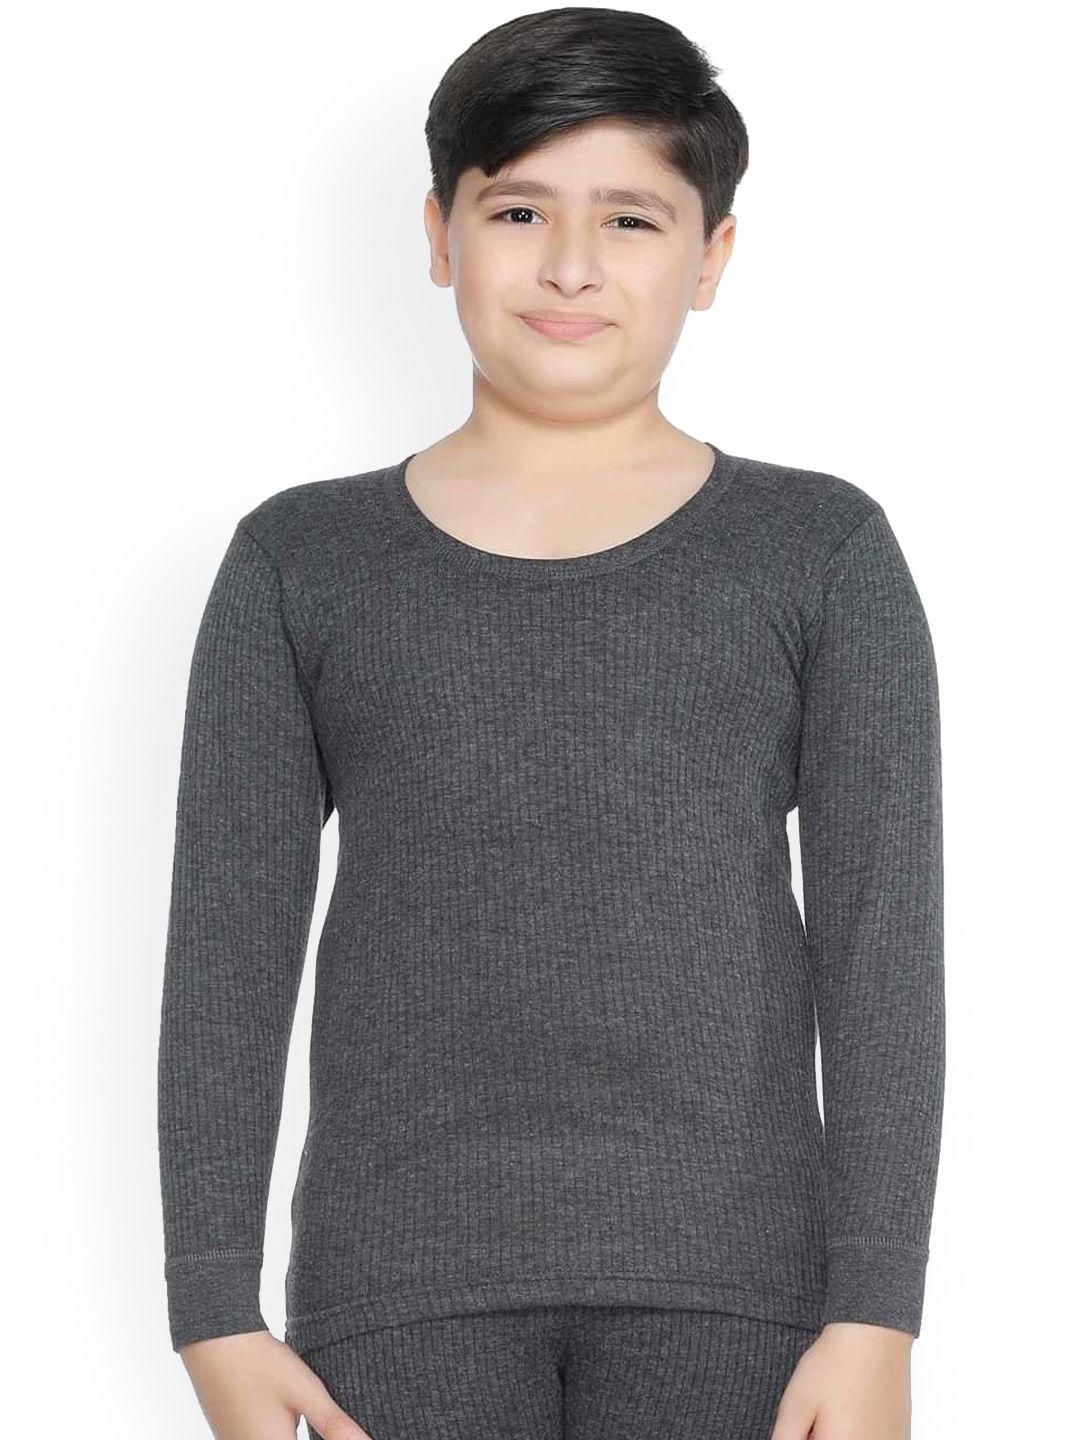 bodycare-kids-boys-grey-solid-cotton-thermal-tops